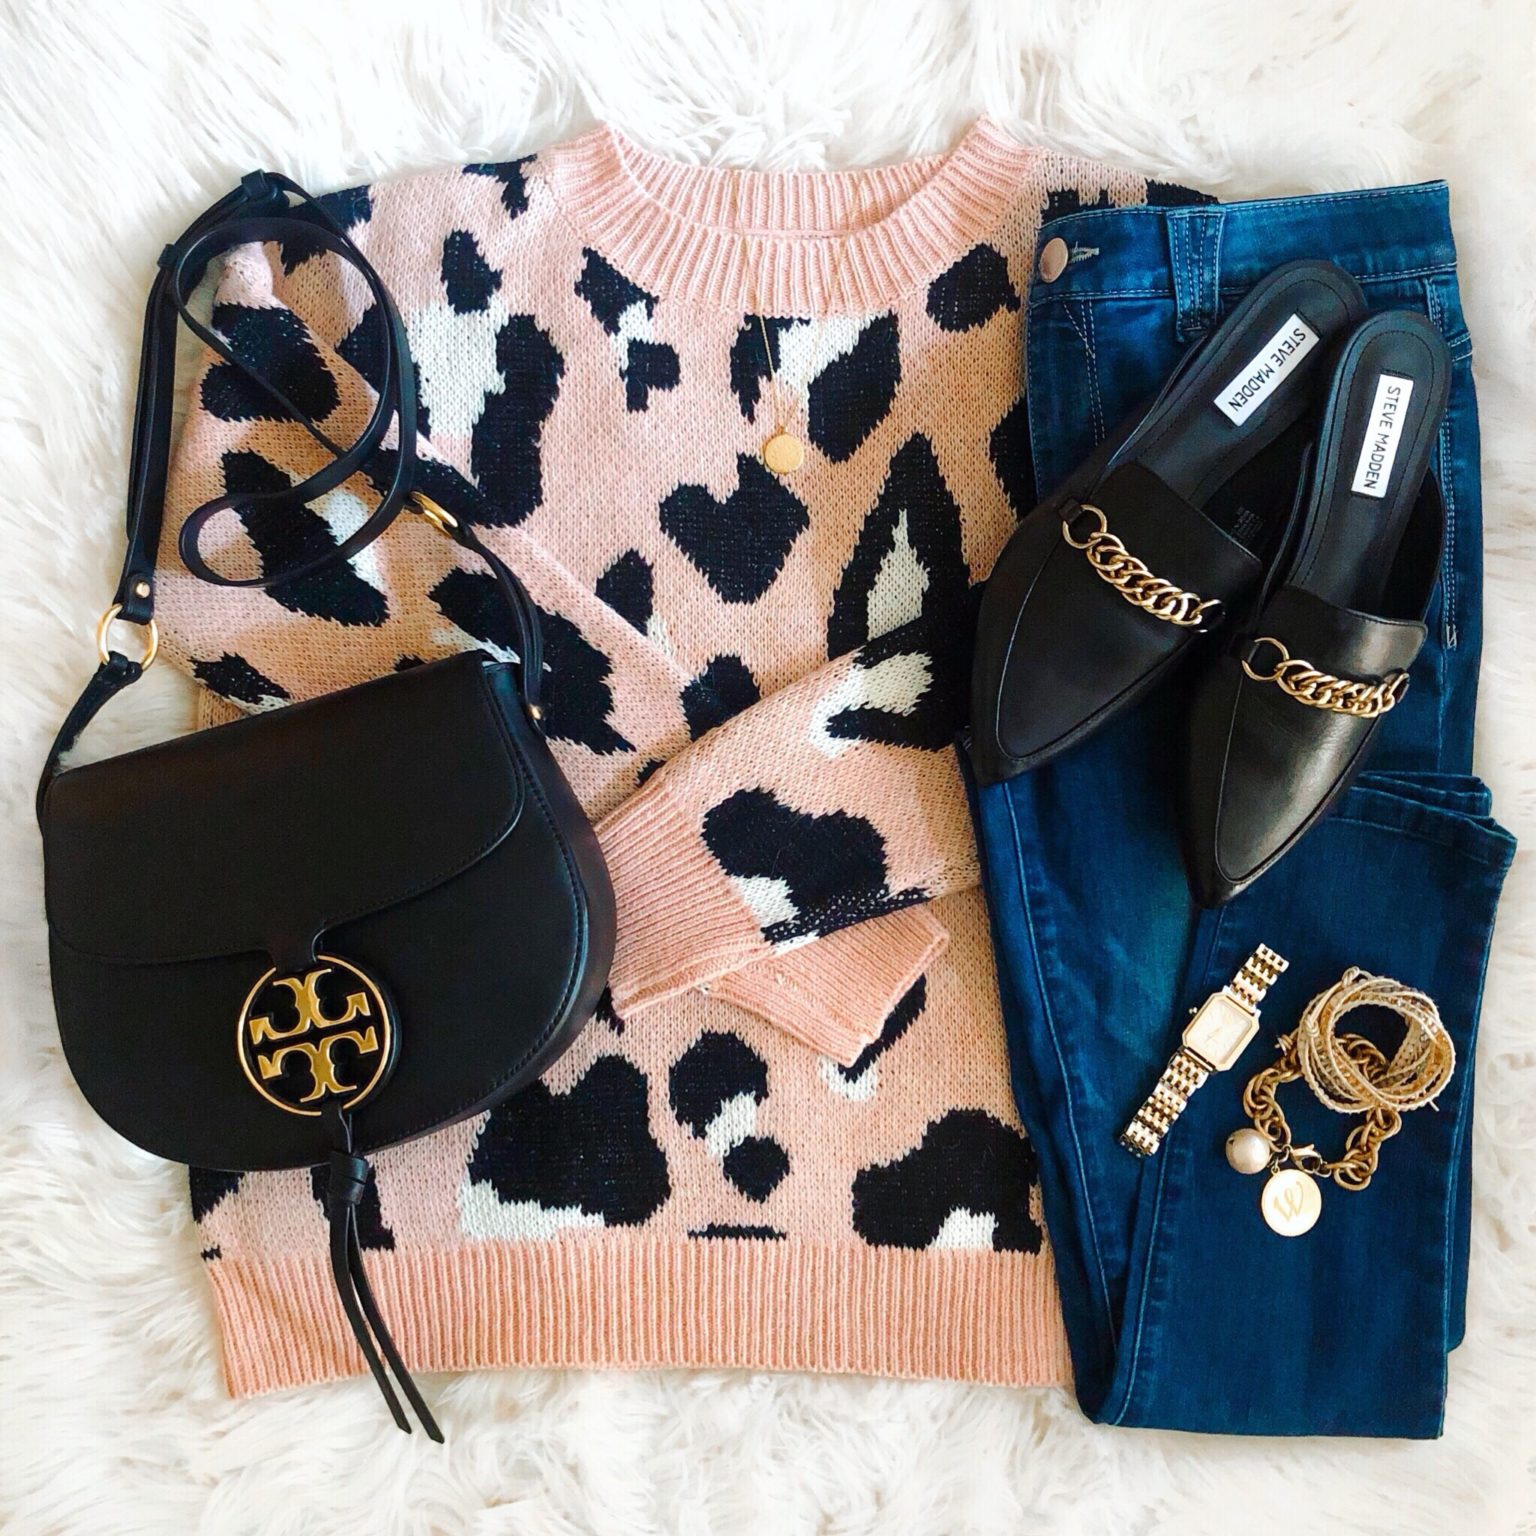 Tory Burch New November Markdowns | Save Up To 40% Off! - The Double ...